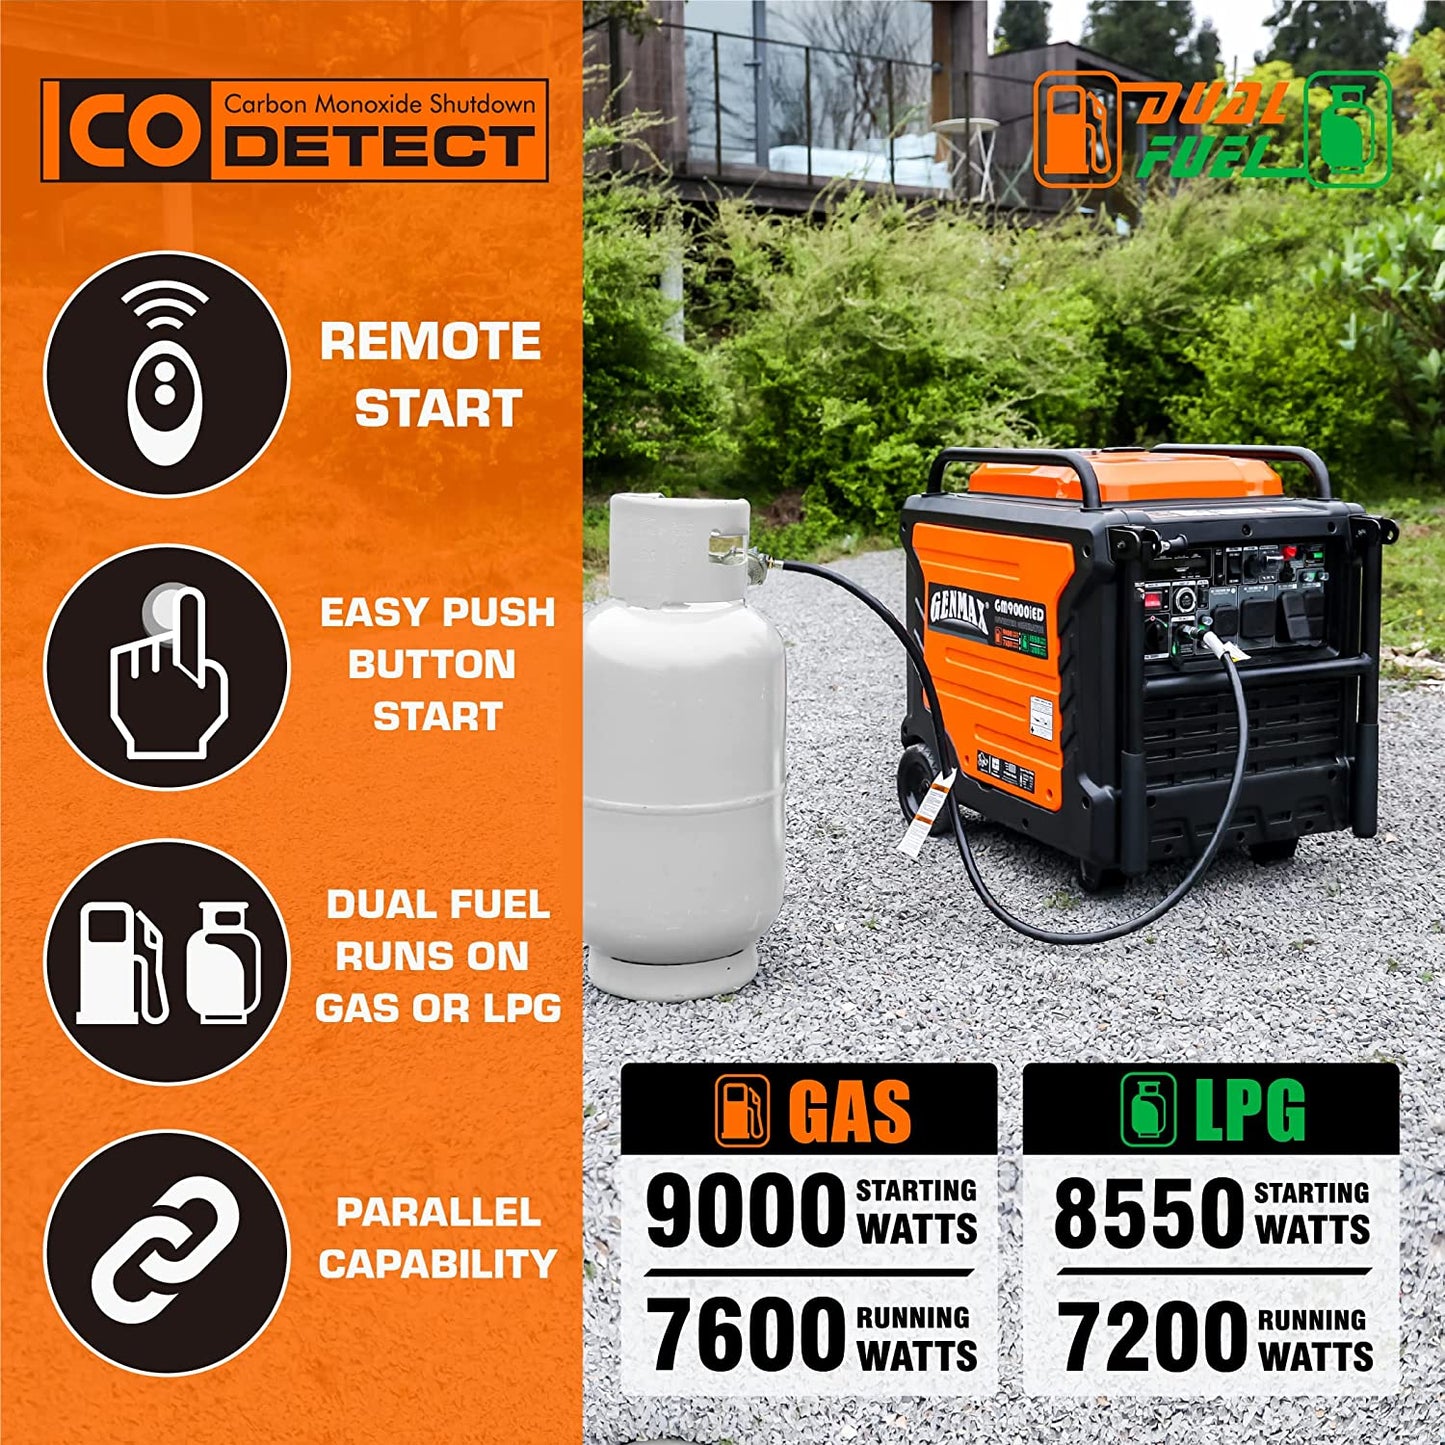 Portable Inverter Generator, 9000W Super Quiet Gas Propane Powered Engine with Parallel Capability, Remote/Electric Start, Ideal for Home Backup Power.Epa Compliant (Gm9000Ied)